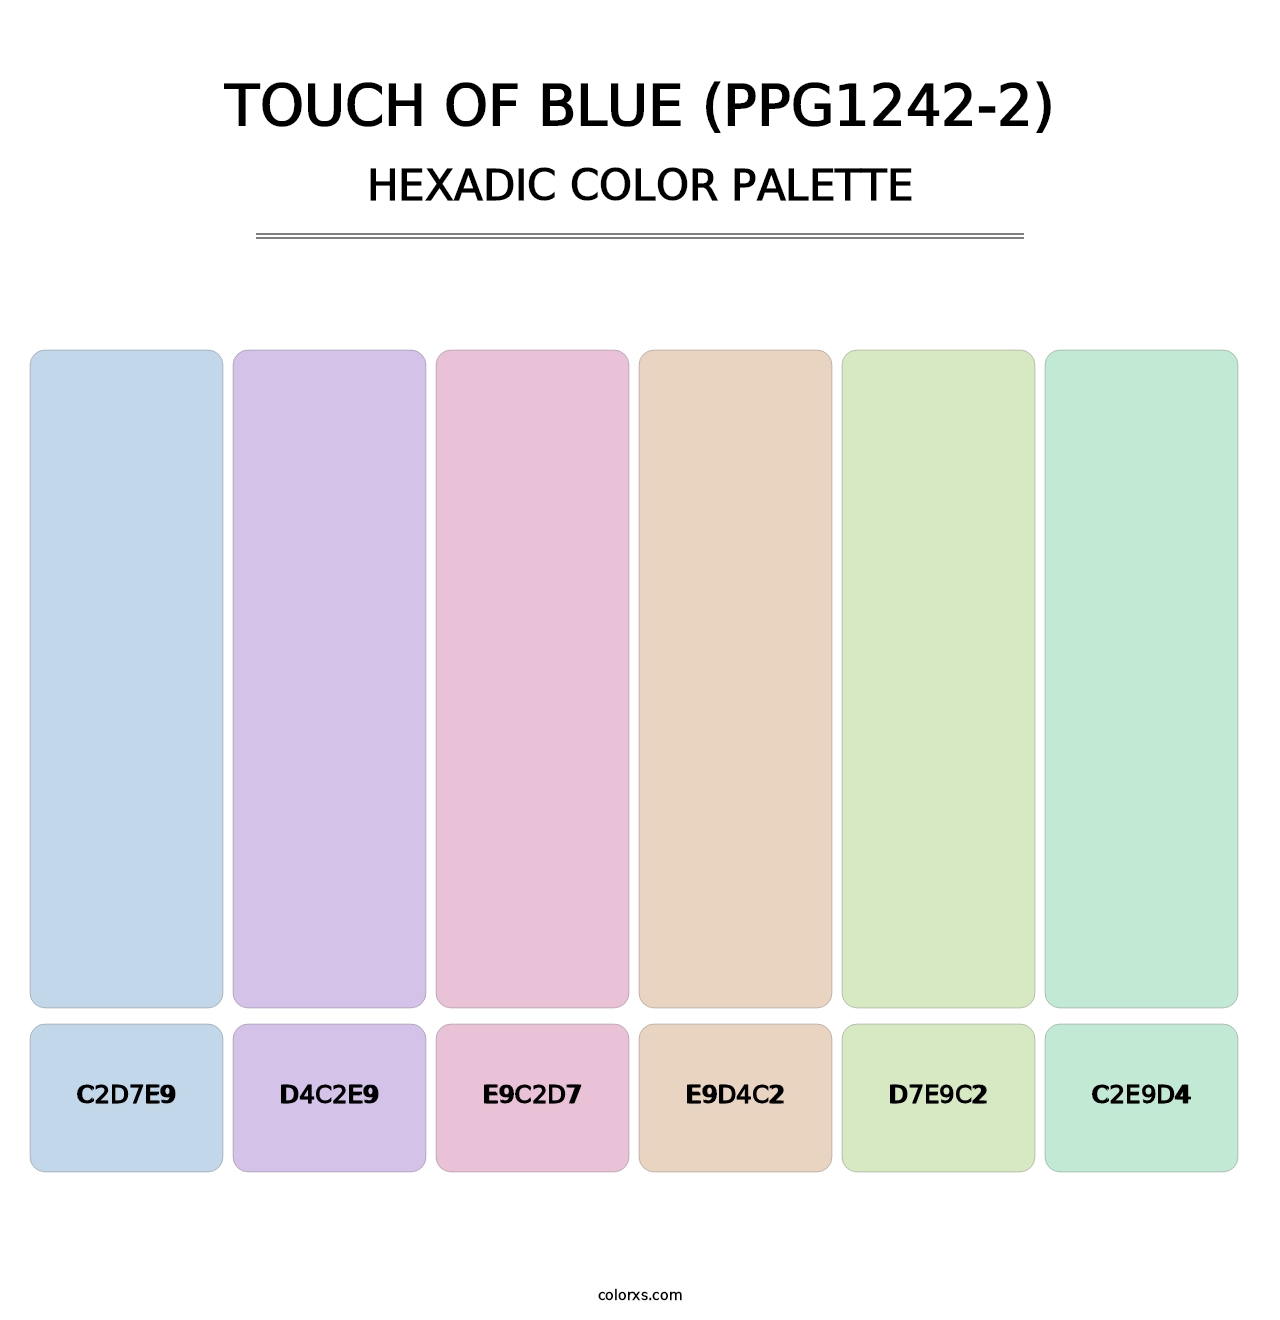 Touch Of Blue (PPG1242-2) - Hexadic Color Palette